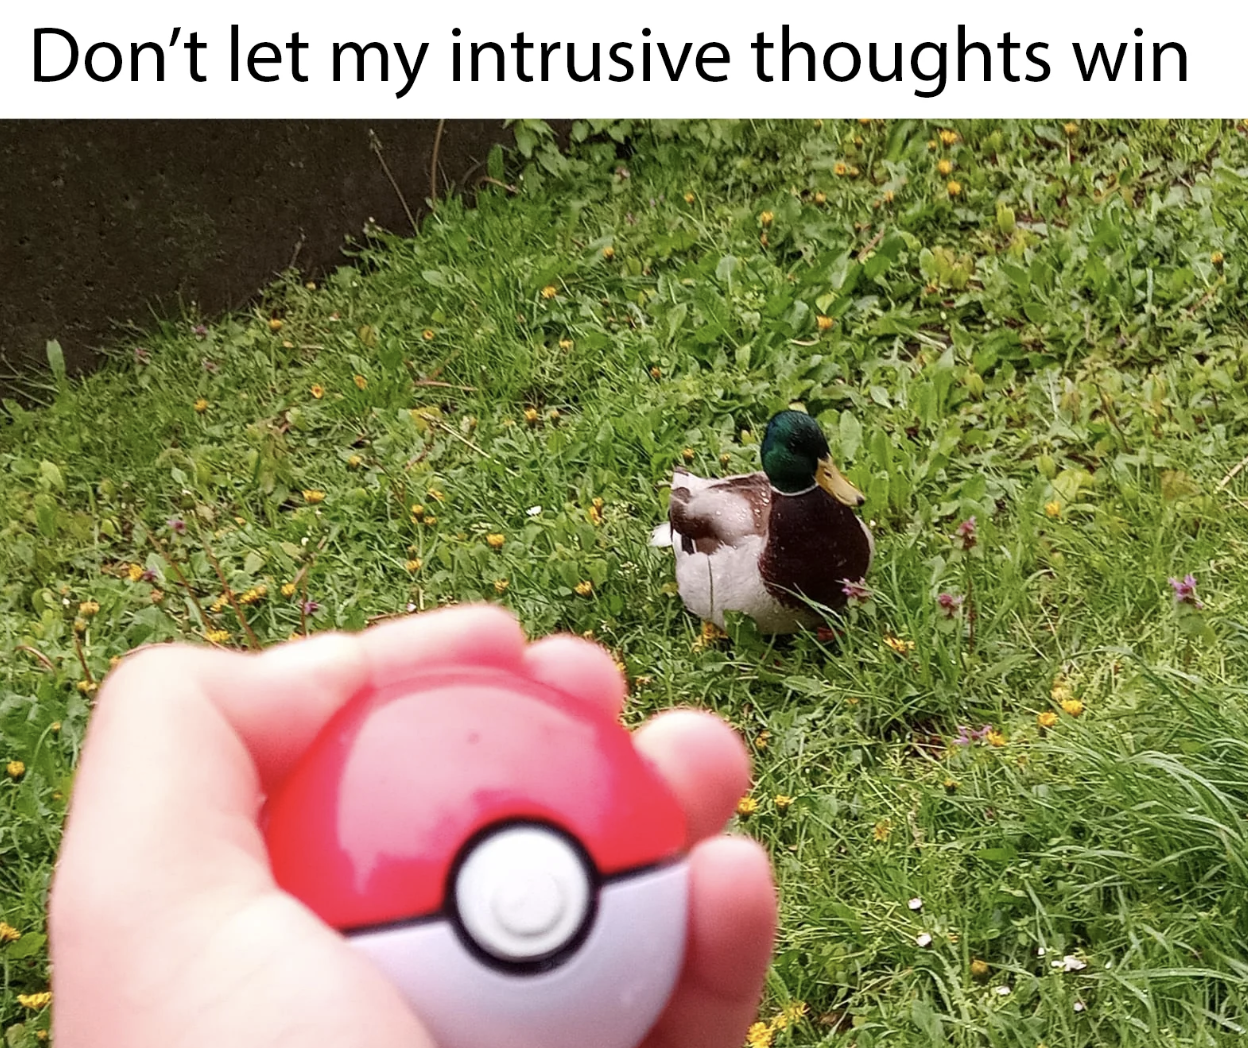 grass - Don't let my intrusive thoughts win